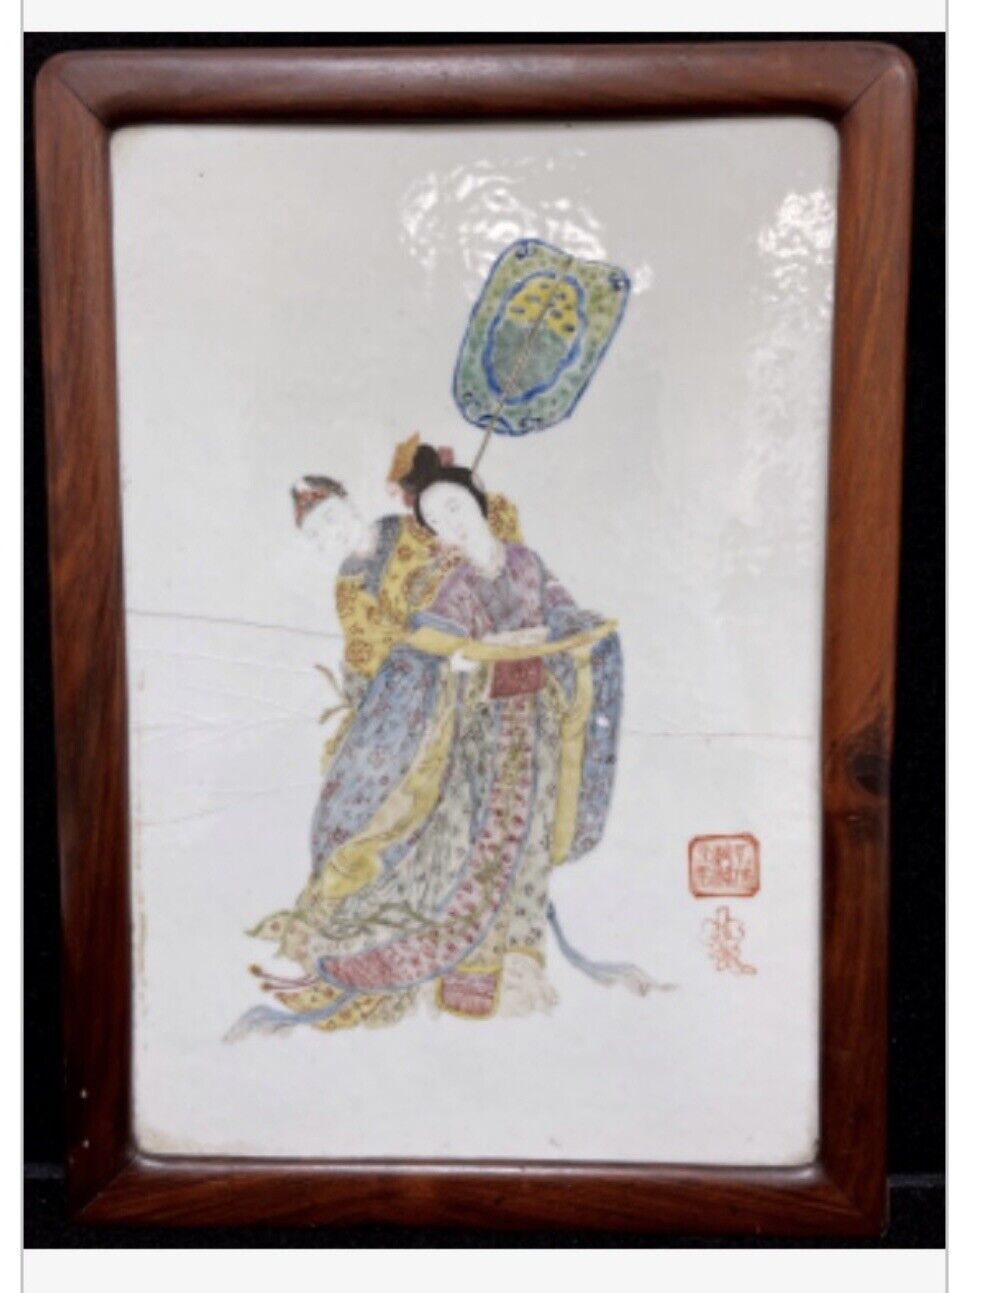 Late 19thc Hand Painted Chinese Art On Tile